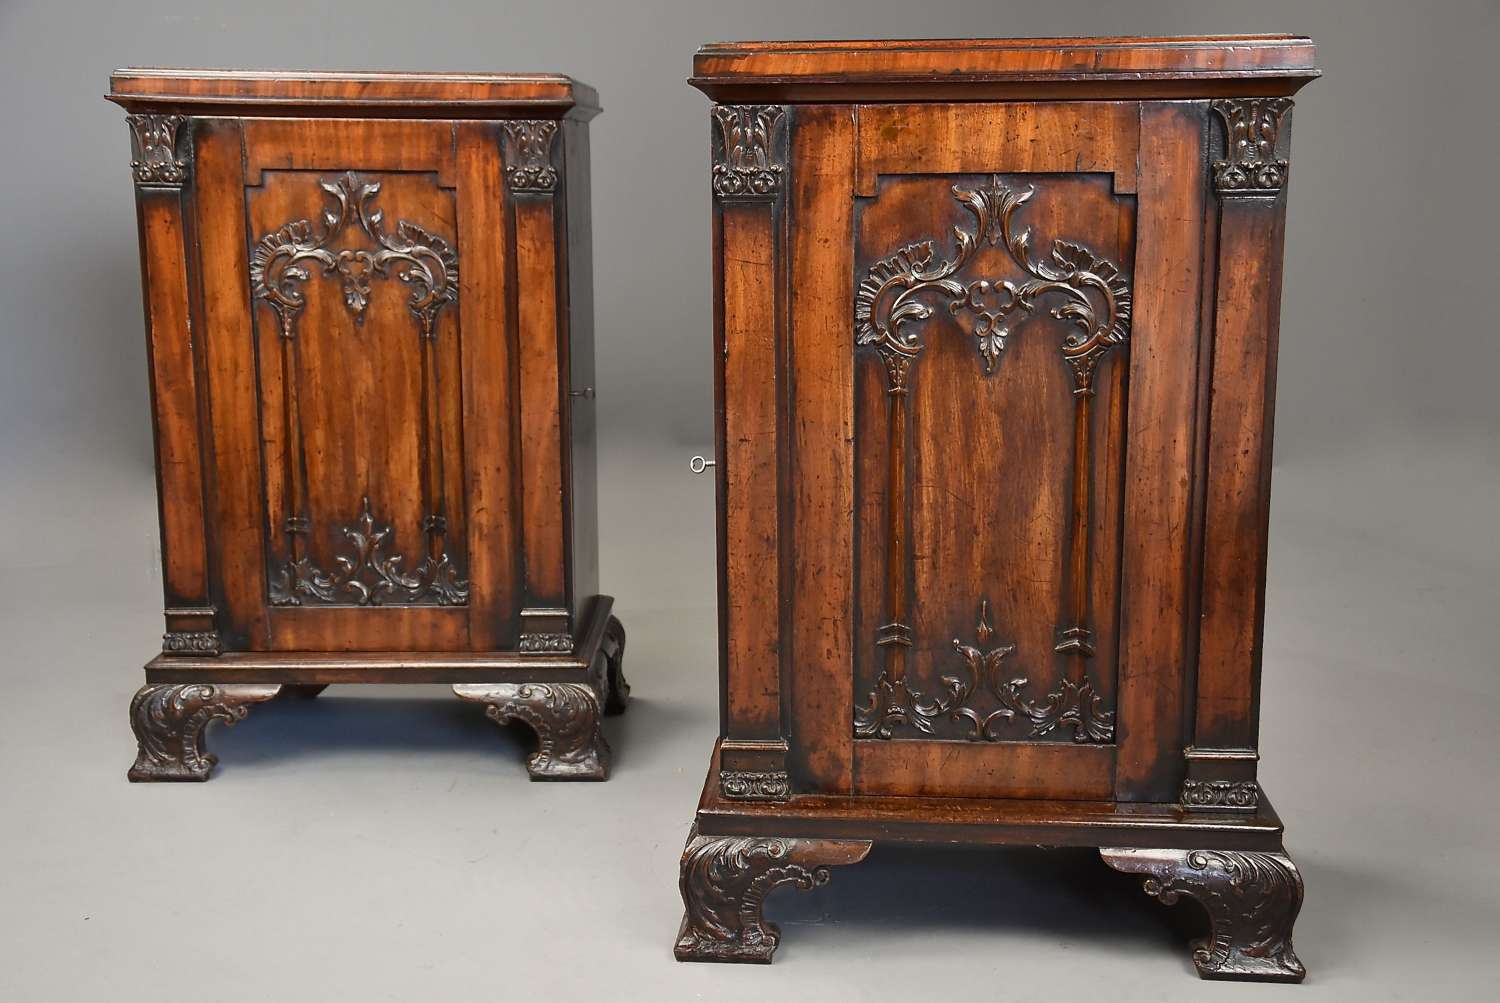 Rare pair of 18thc Chippendale pedestal cabinets of exceptional colour